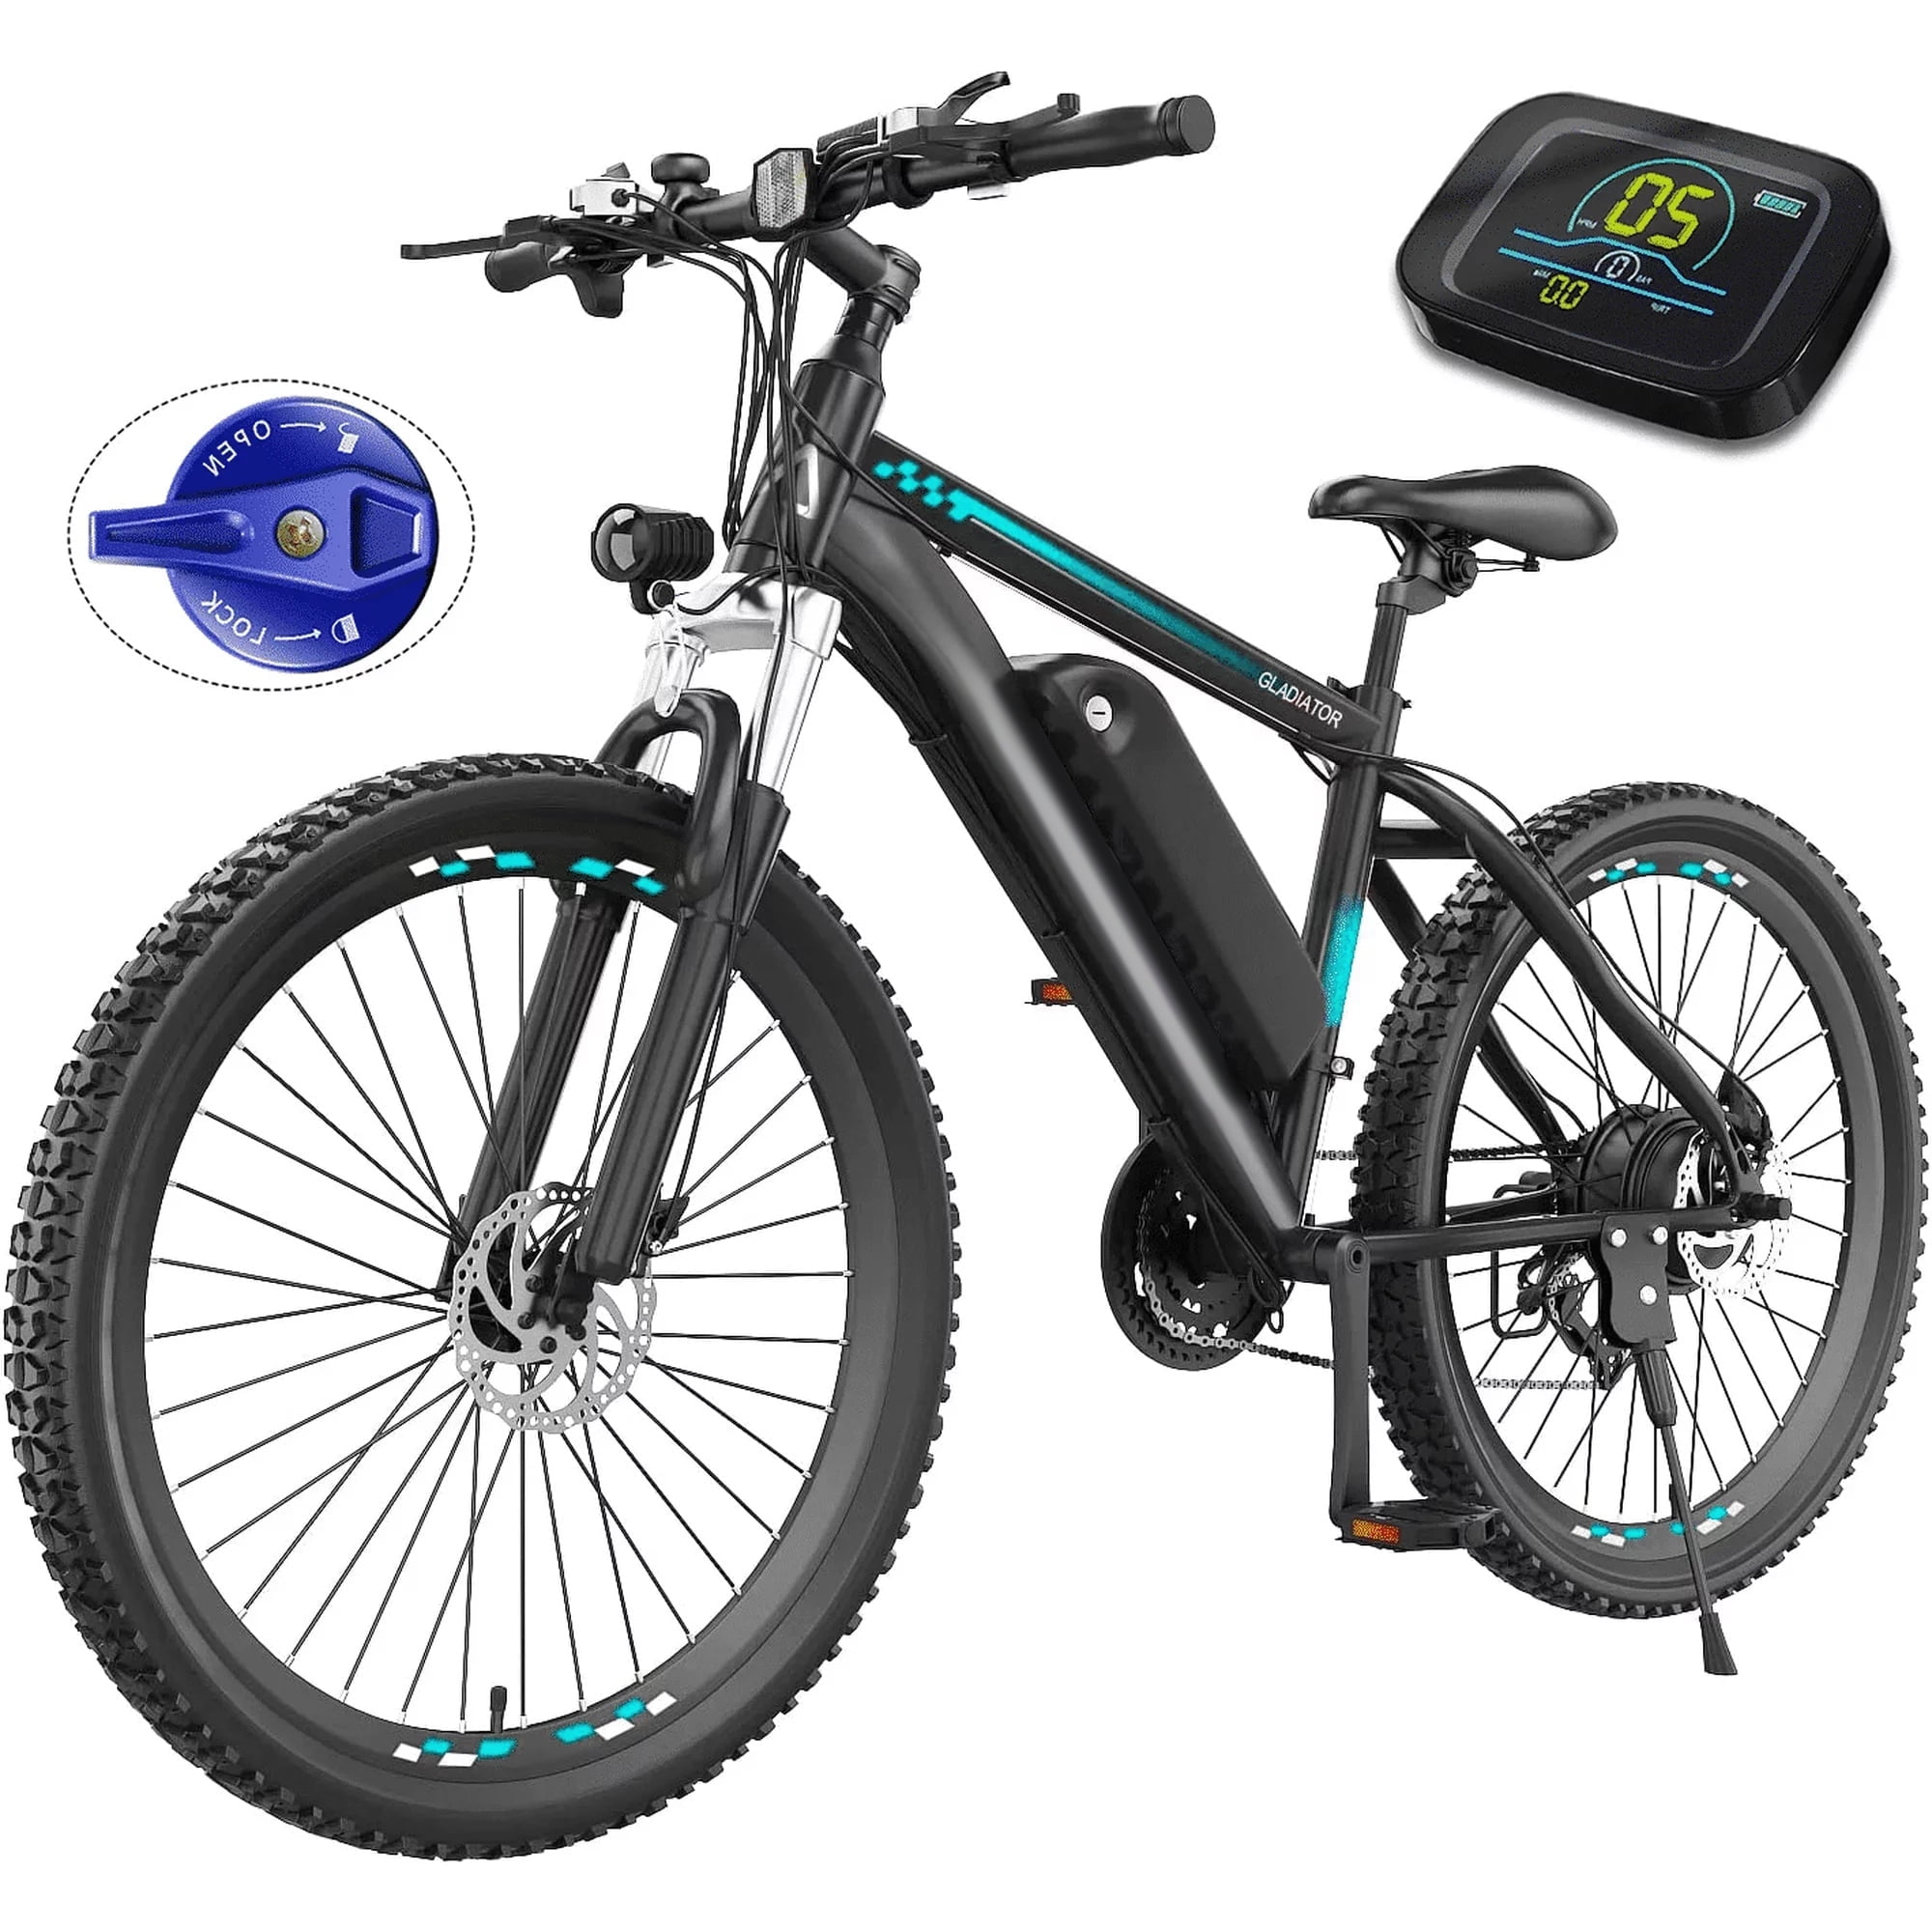 Gocio Electric Bike, Electric Bike for Adults 26" Ebike 500W Adult Electric Bicycle, 48V 10.4Ah 19.8MPH Electric Mountain Bike, Lockable Suspension Fork, Color LCD Display, Shimano 21 Speed - image 1 of 9